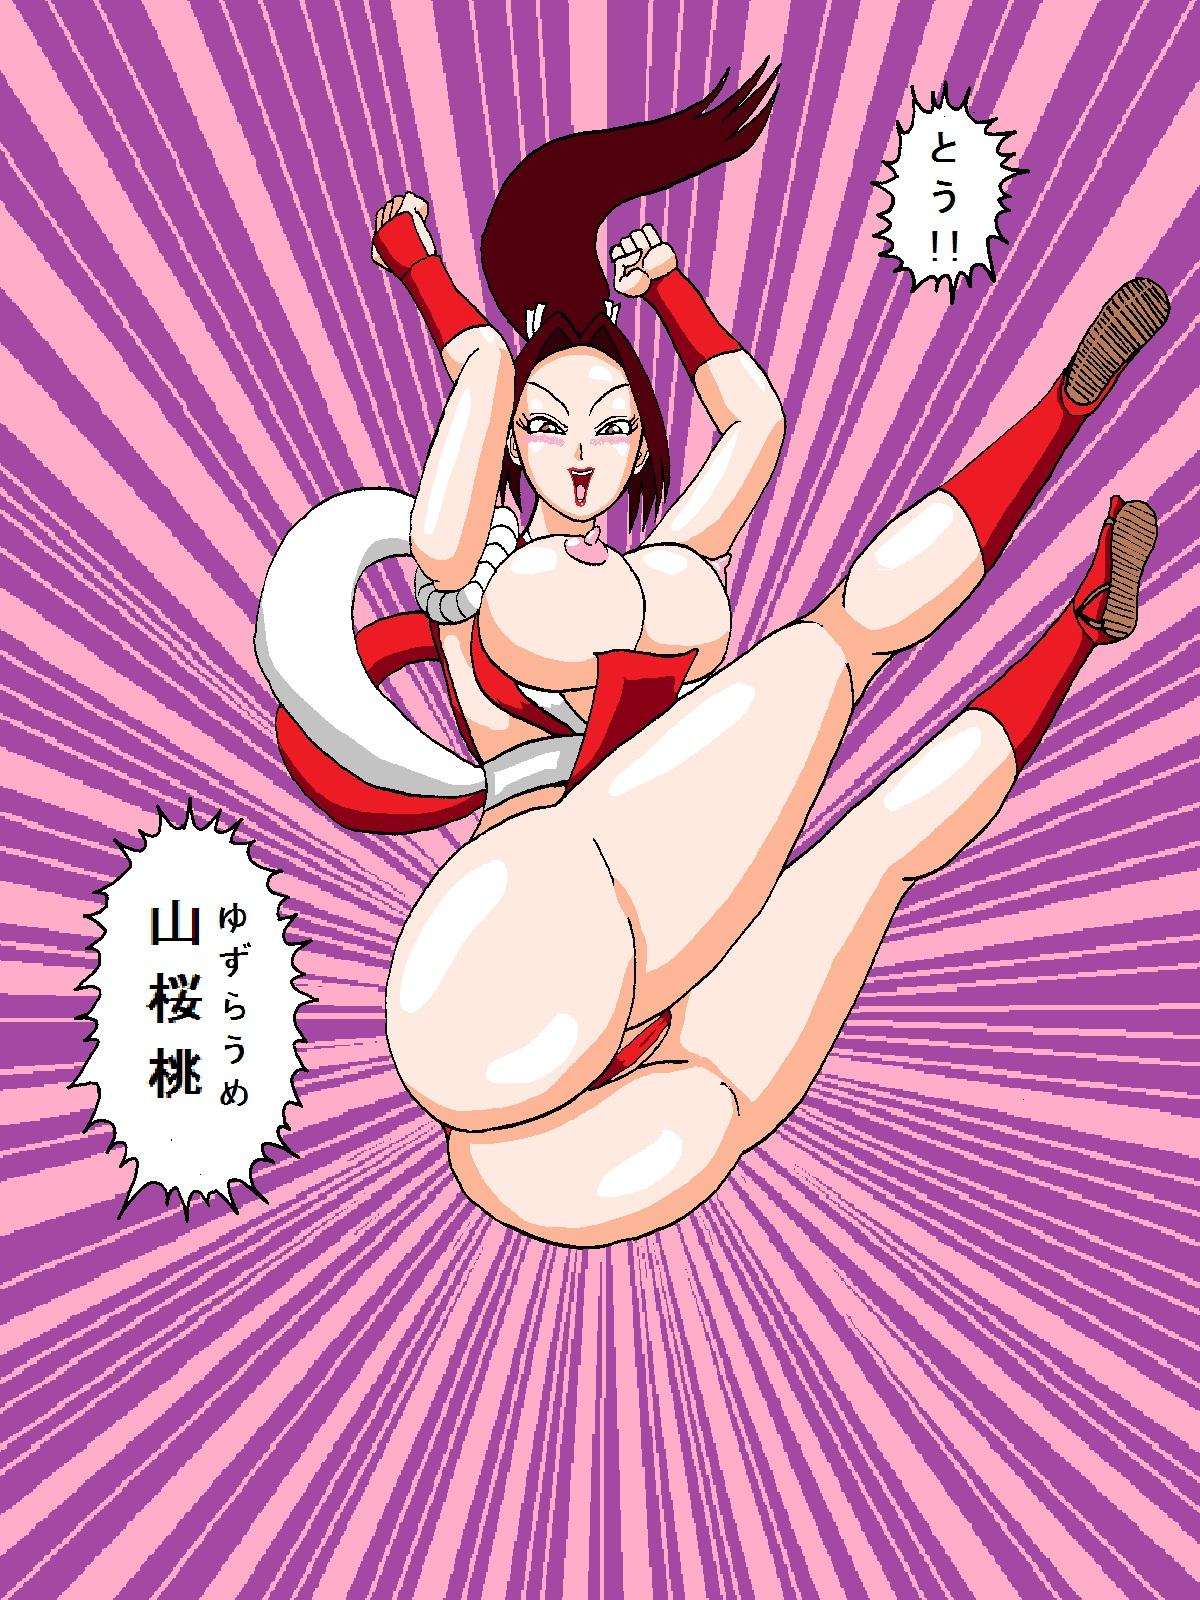 Crazy [舞狩] Mai-chan vs Chris-kun (King of Fighters) - King of fighters Caliente - Page 10